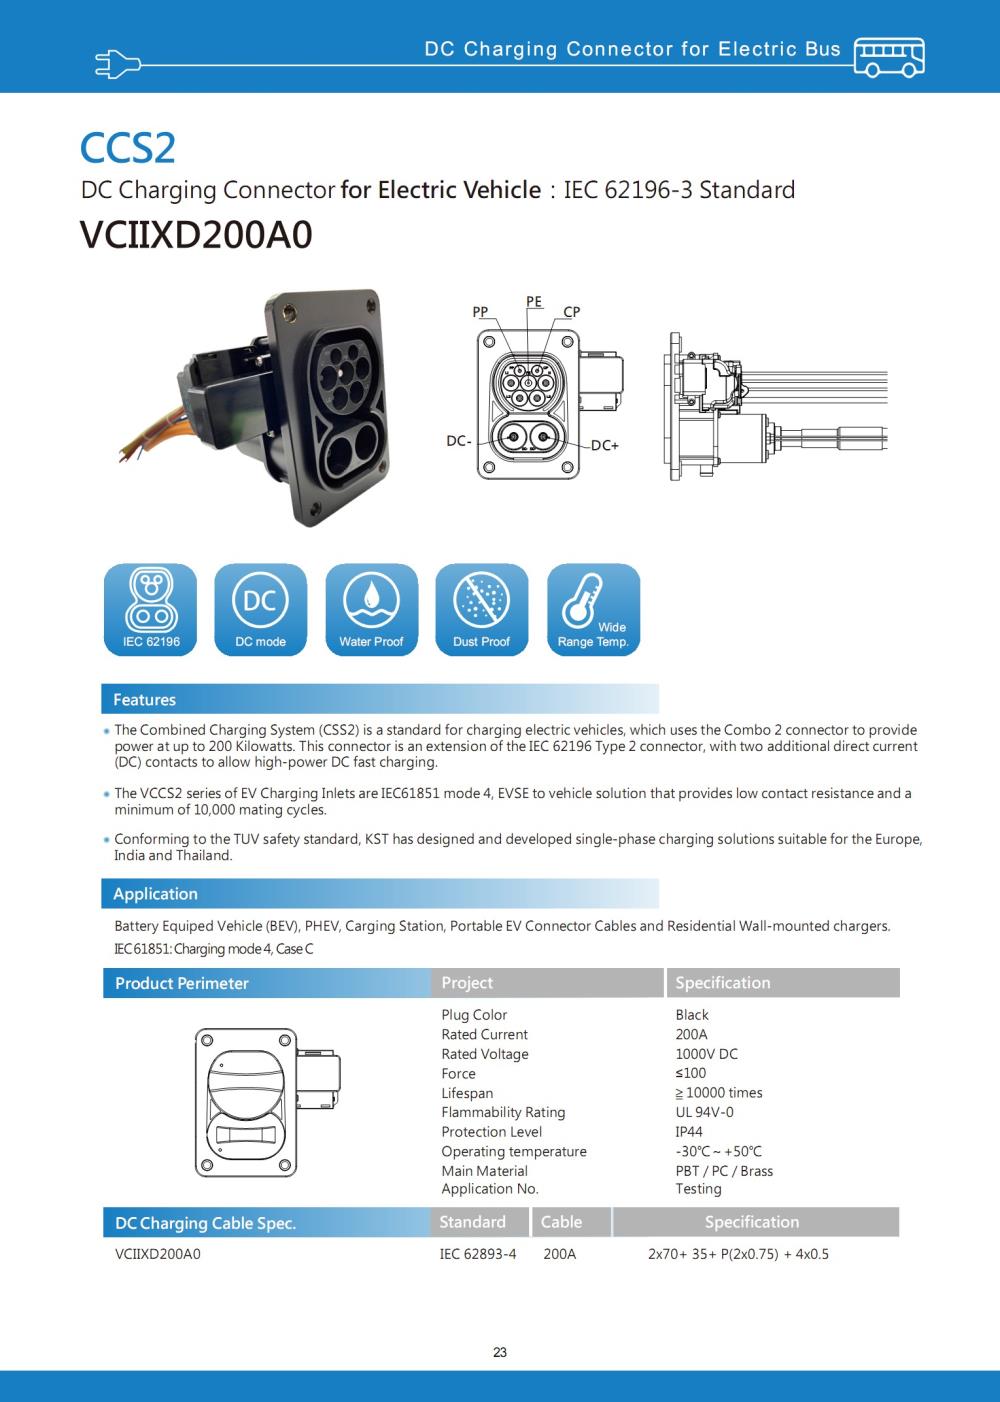 AC Charging Connector for Electric Vehicle - หัวชาร์จรถยนต์ไฟฟ้า,AC Charging Connector for Electric Vehicle - หัวชาร์จรถยนต์ไฟฟ้า รถไฟฟ้า,K.S.T,Electrical and Power Generation/Electrical Equipment/Battery Chargers